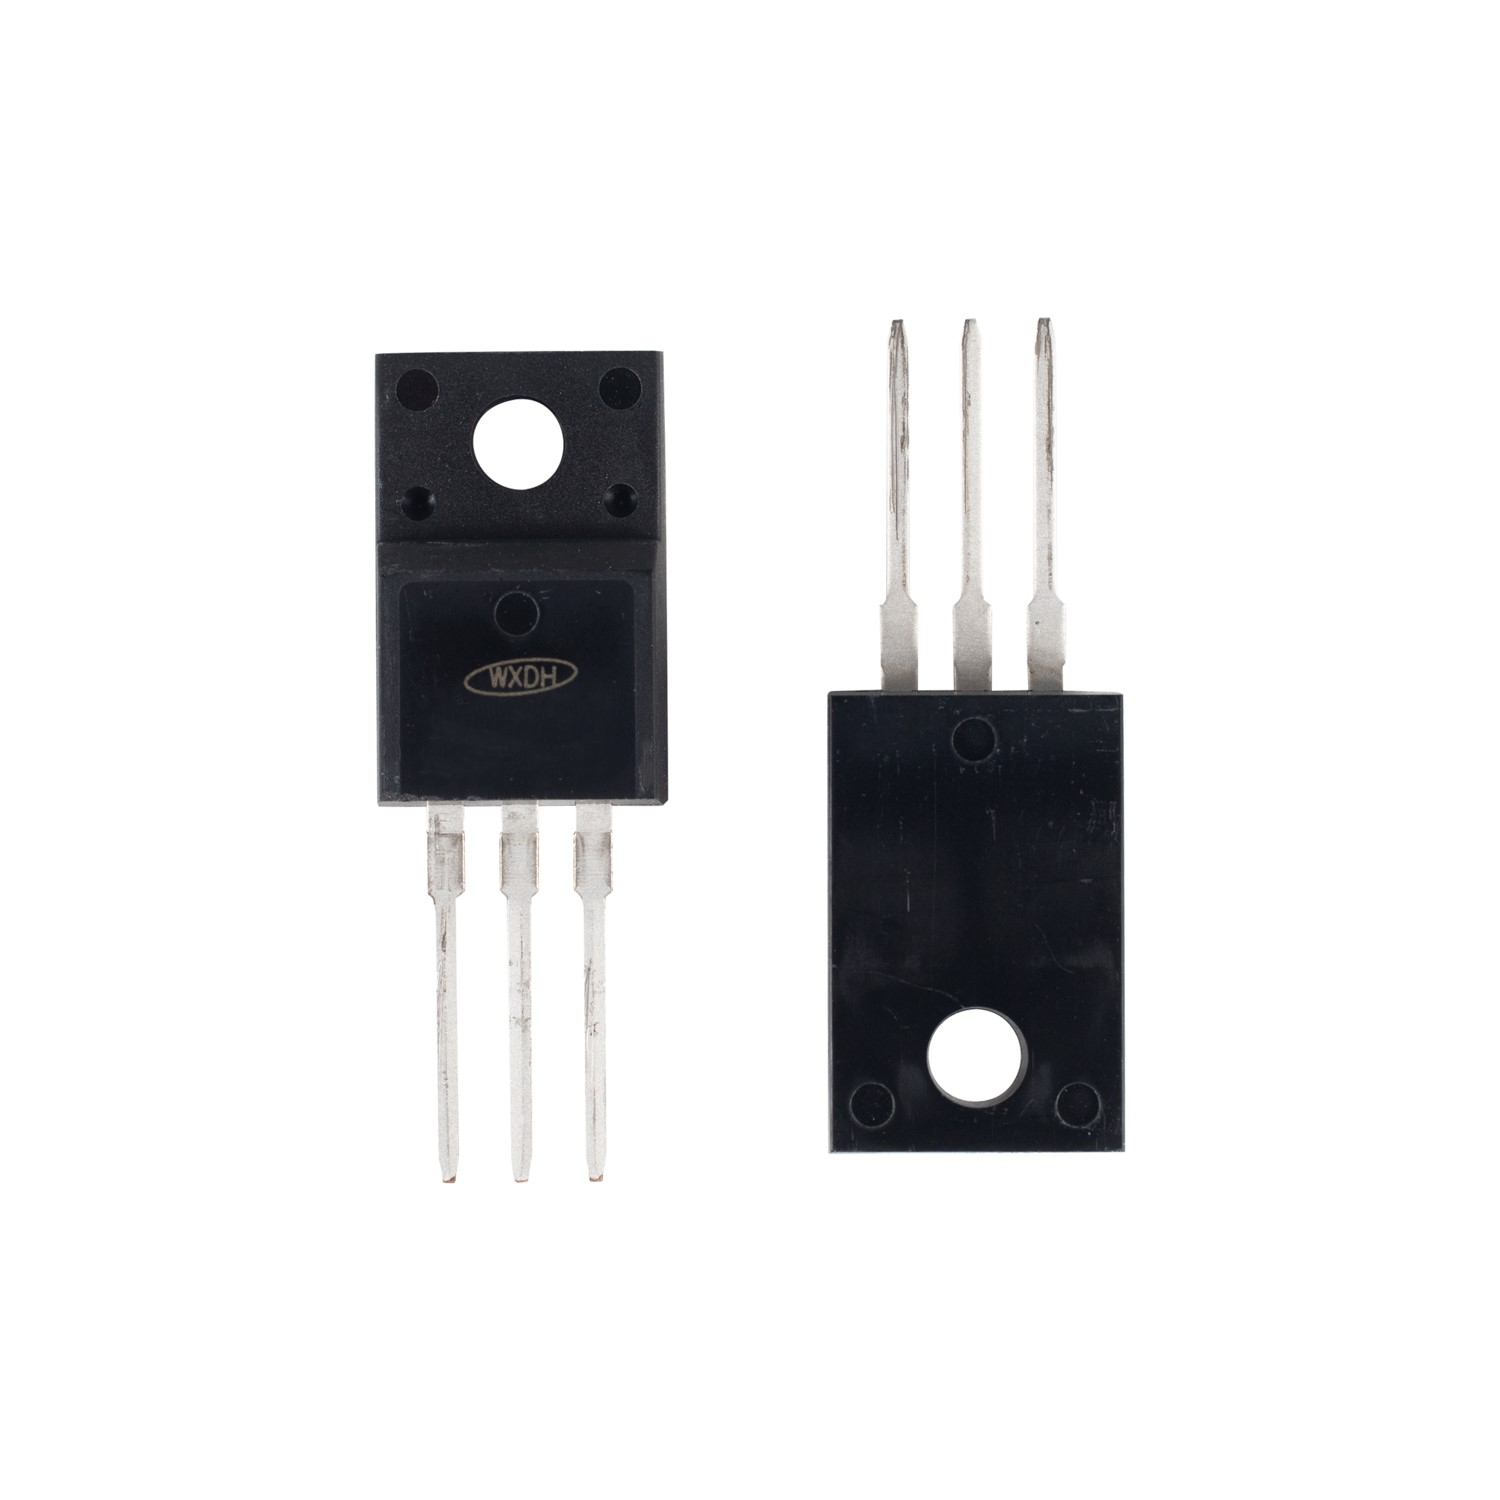 10.6A 700V N-channel Super Junction Power MOSFET DJF420N70T TO-220F